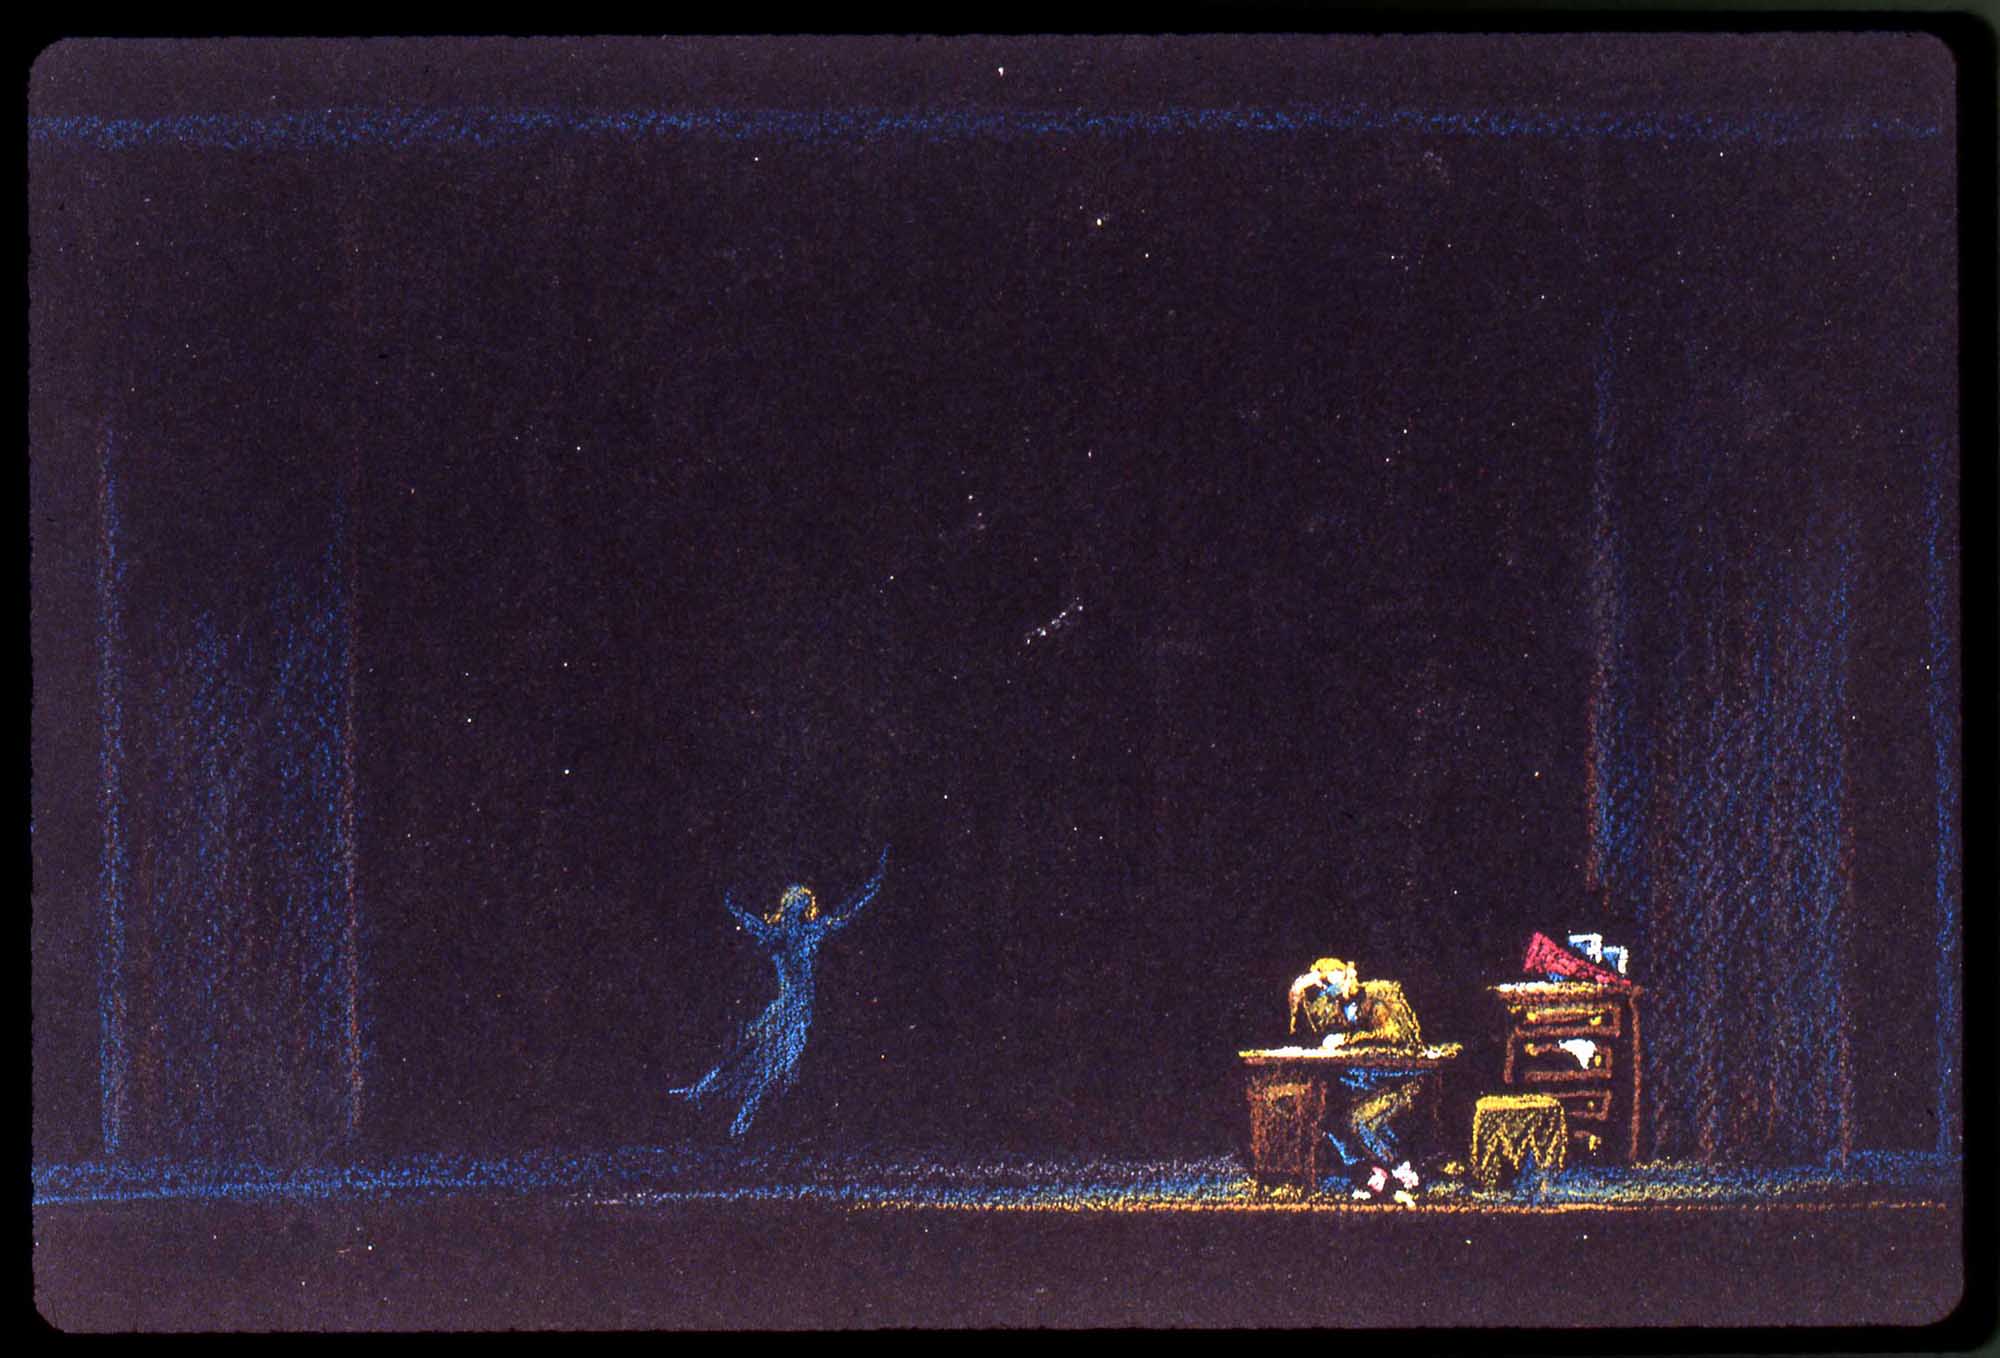 A set design rendering from the 1947 Broadway production of Allegro.